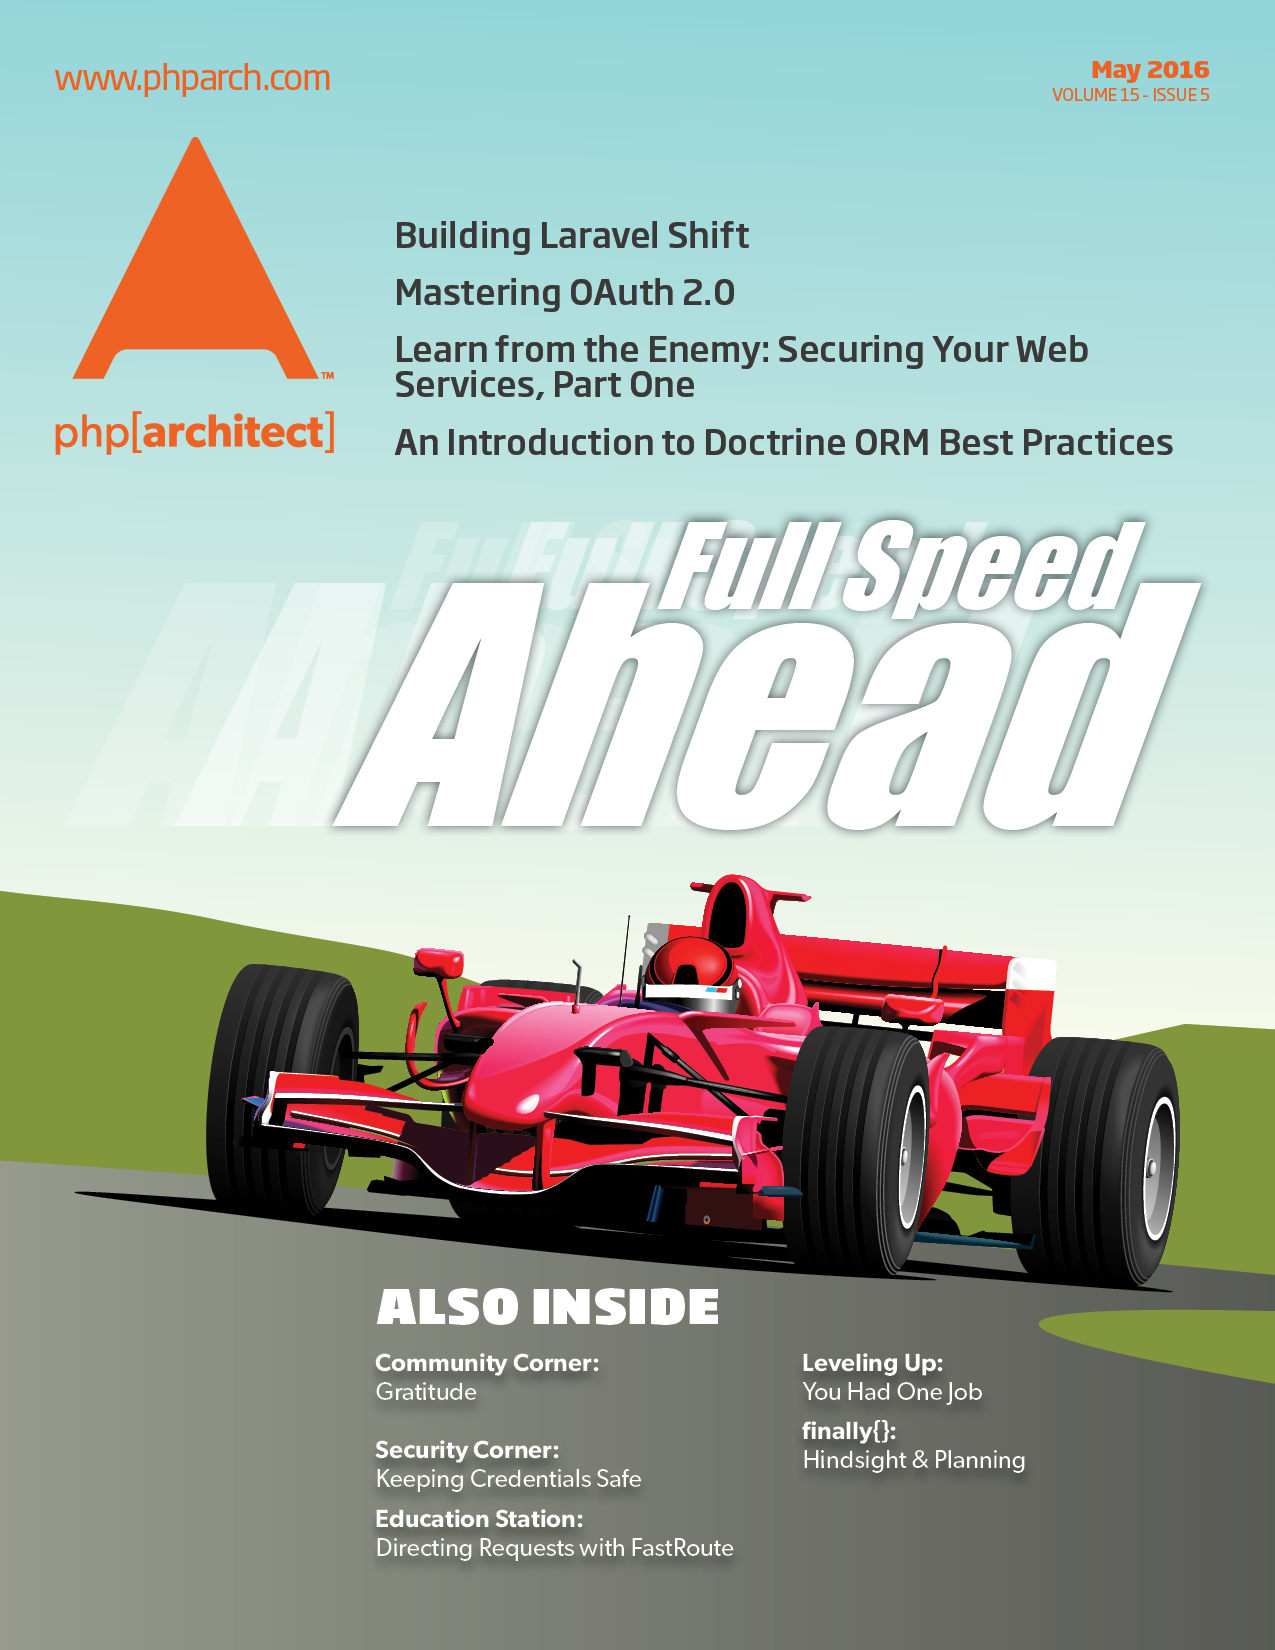 Full Speed Ahead magazine cover featuring an F1 racing car